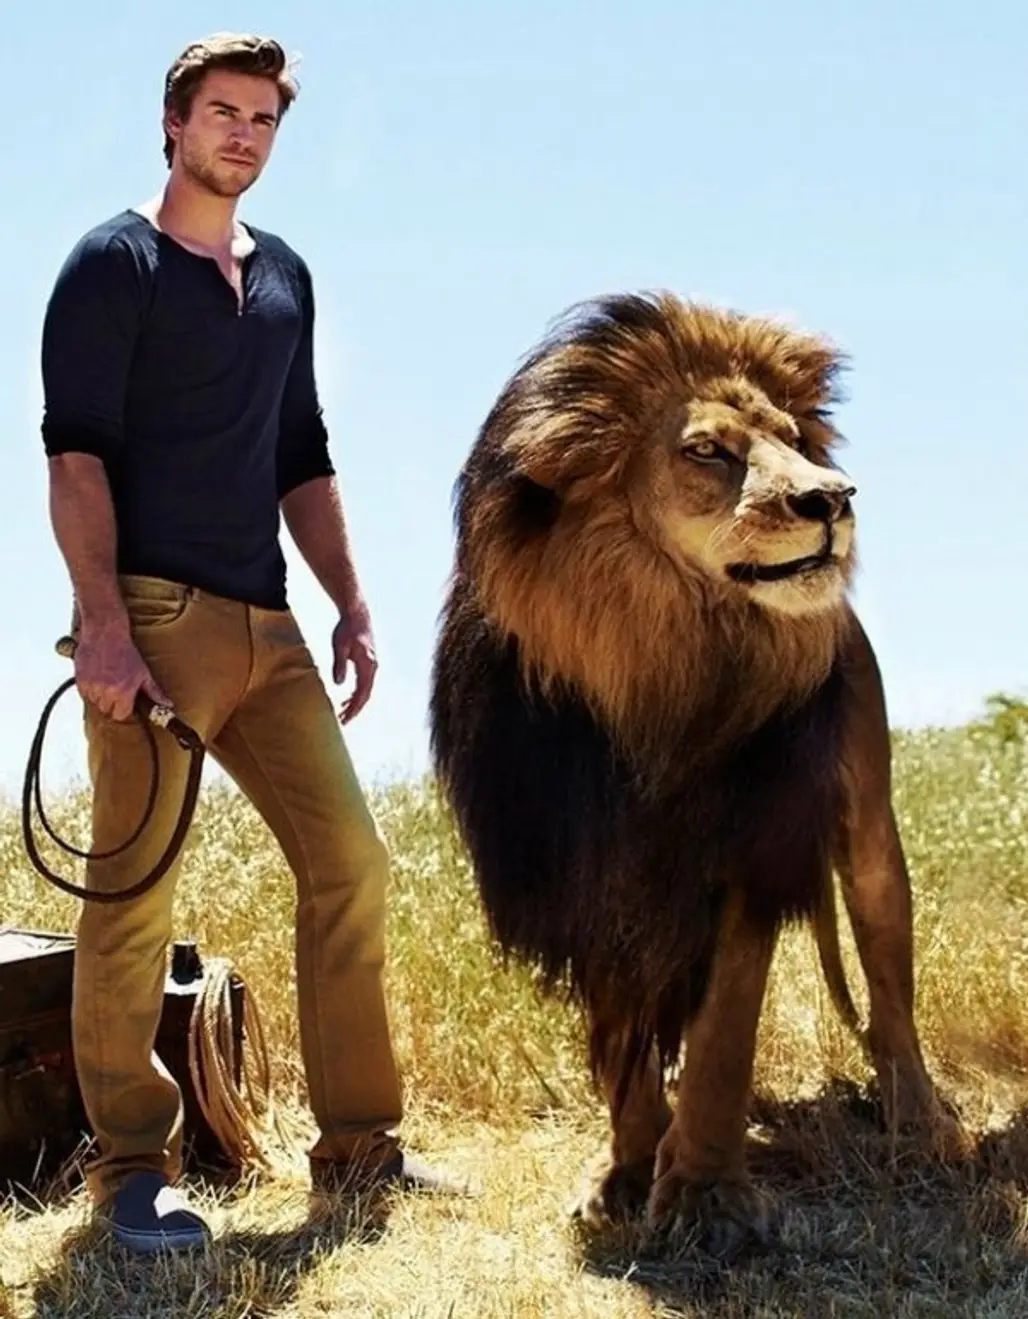 Liam with a Lion